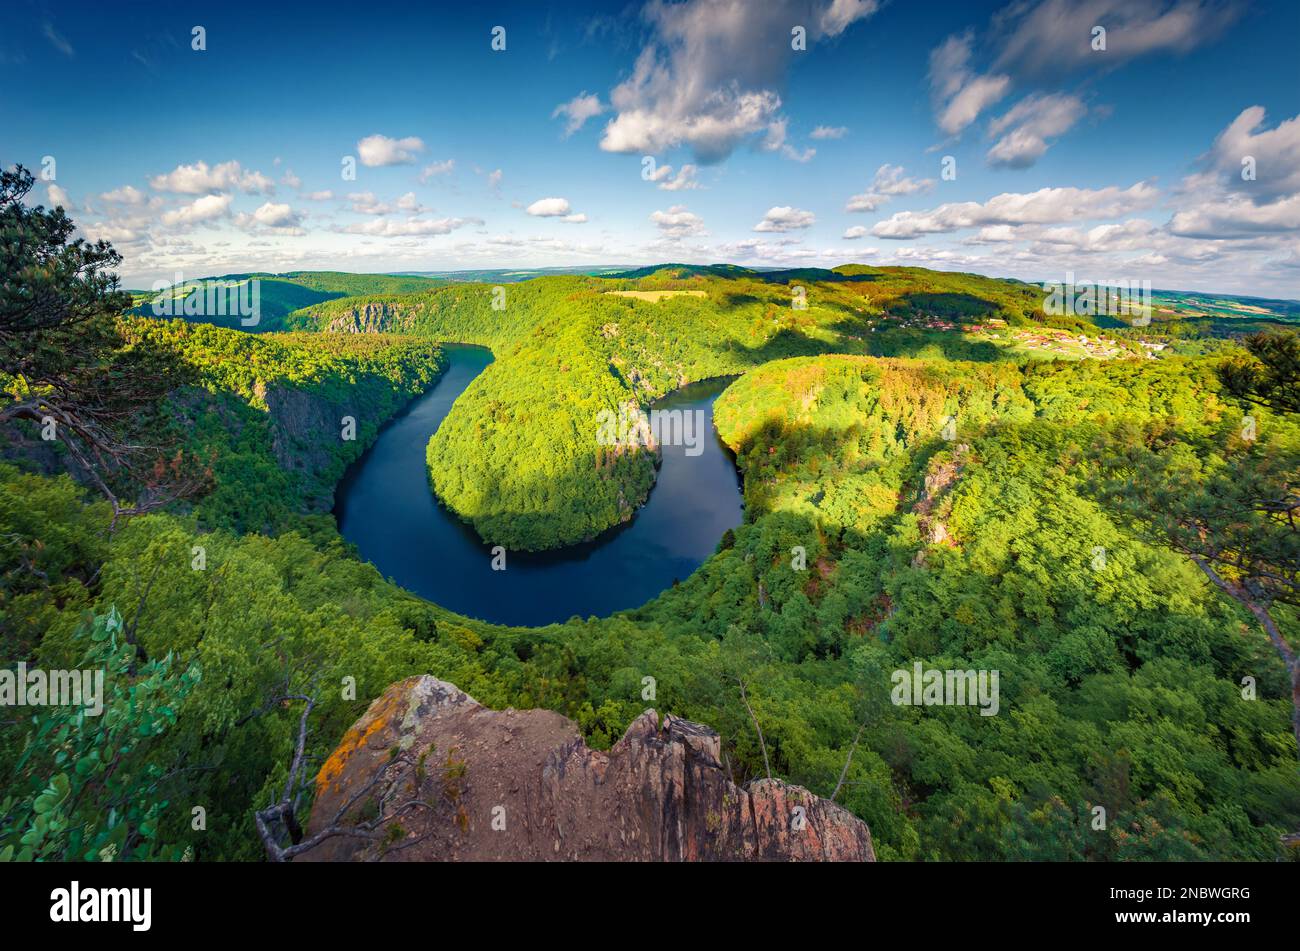 Fresh green view of Vltava river horseshoe shape meander from Maj viewpoint. Amazing summer scene of mountain canyon in Czech Republic. Beauty of natu Stock Photo